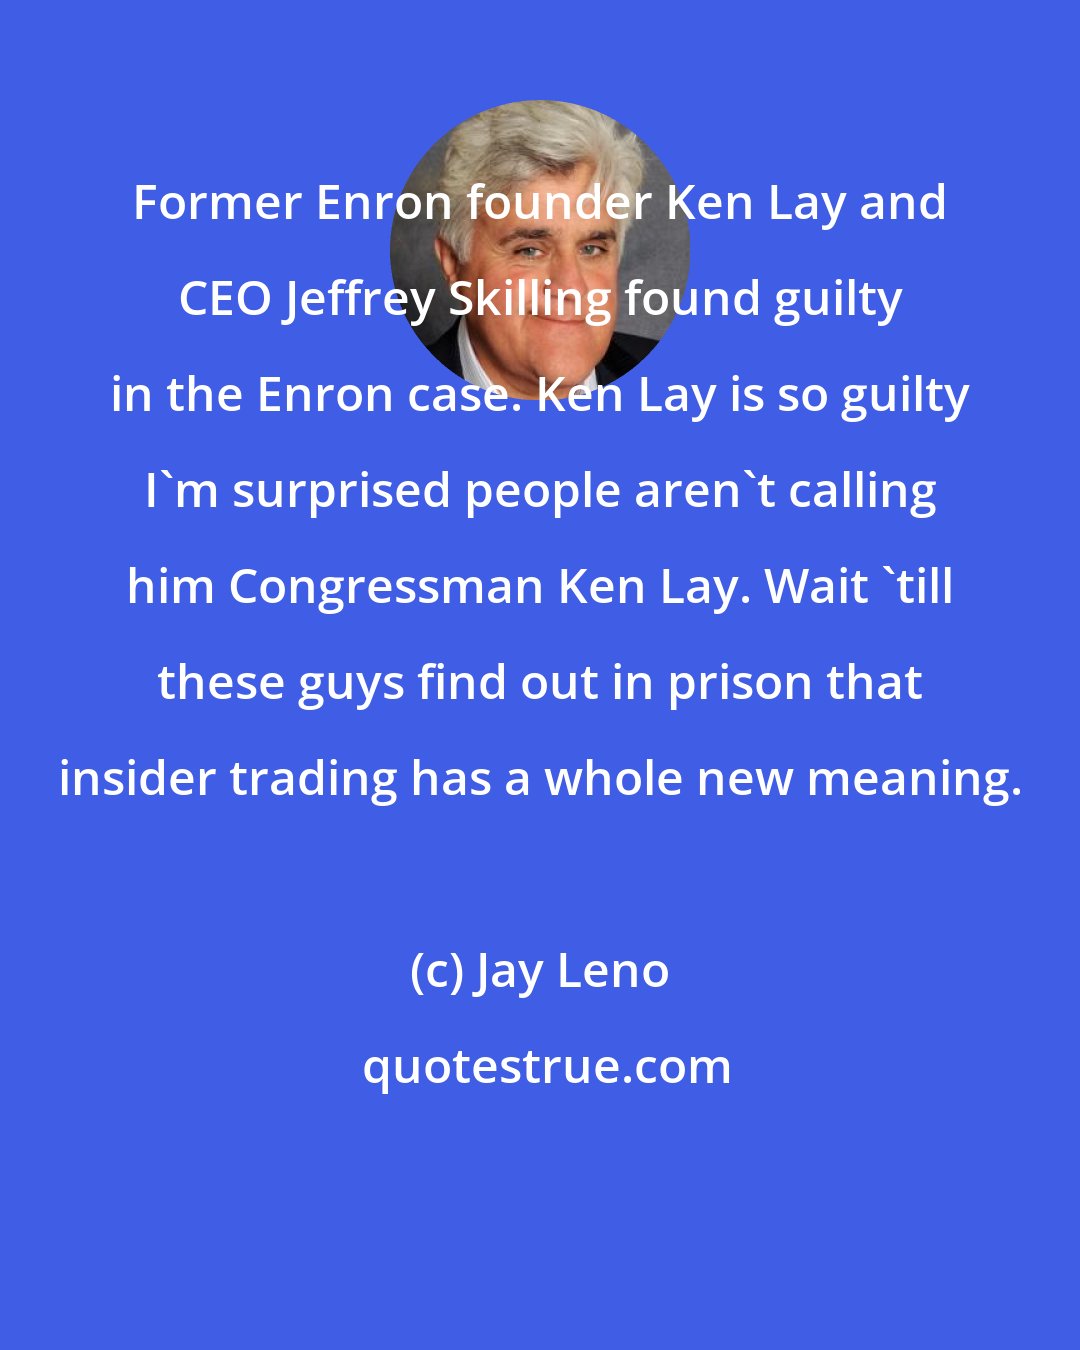 Jay Leno: Former Enron founder Ken Lay and CEO Jeffrey Skilling found guilty in the Enron case. Ken Lay is so guilty I'm surprised people aren't calling him Congressman Ken Lay. Wait 'till these guys find out in prison that insider trading has a whole new meaning.